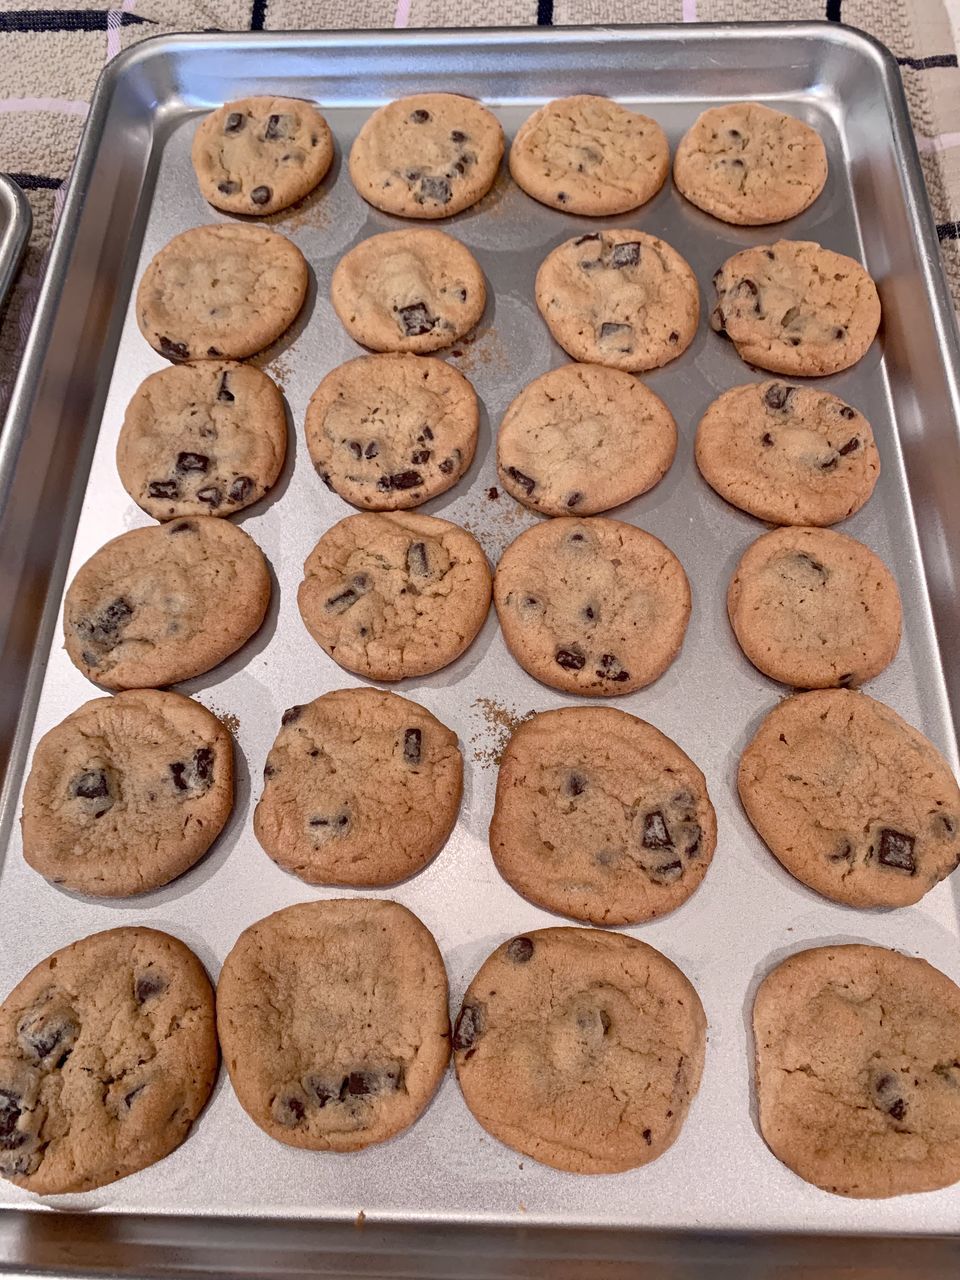 HIGH ANGLE VIEW OF COOKIES IN ROW